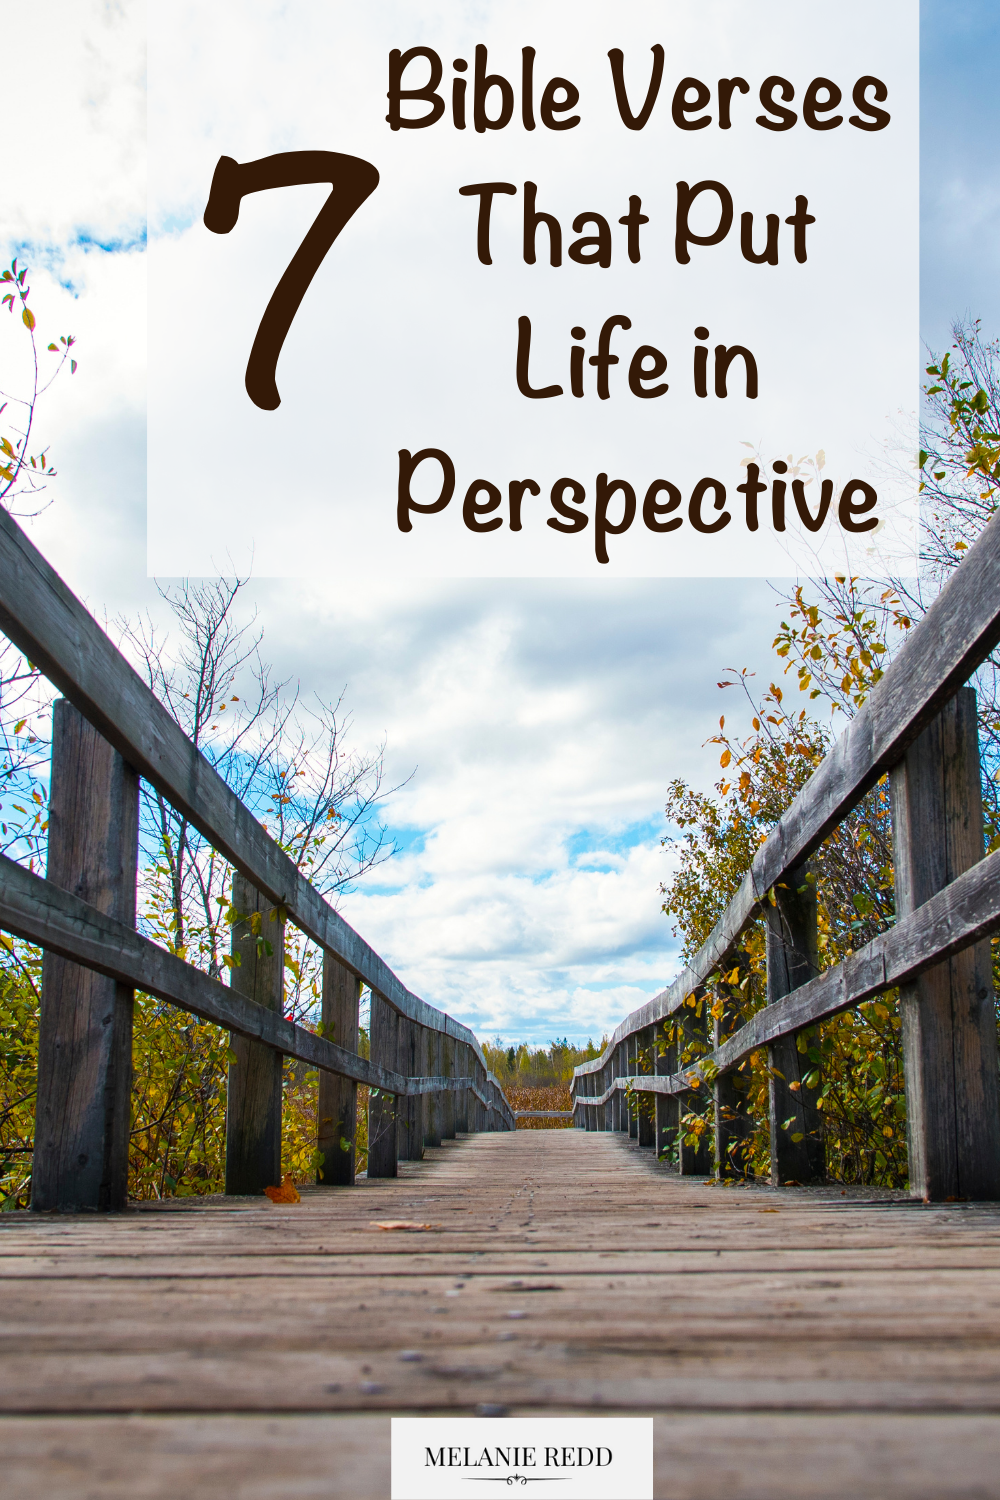 Perspective is the broad grid through which we look at our lives. Sometimes we lose perspective and begin to lose heart. Here are 7 Bible verses that help to put life in perspective. Why not stop by and be encouraged? #perspective #hope #help